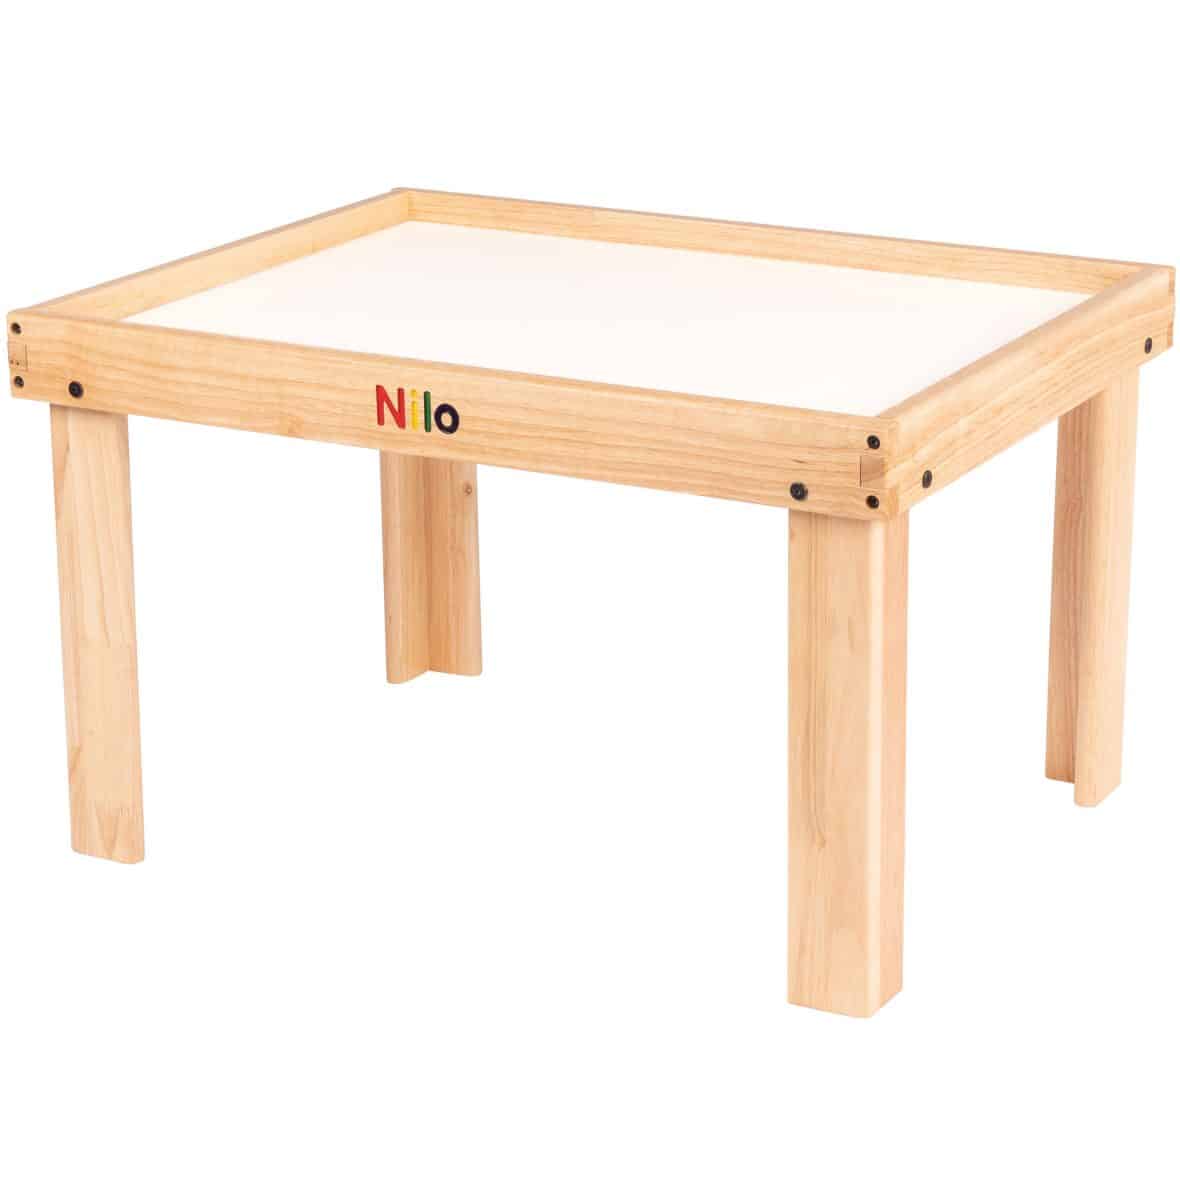 small play table for kids, activity table for kids, toy table, small toy table, small train table